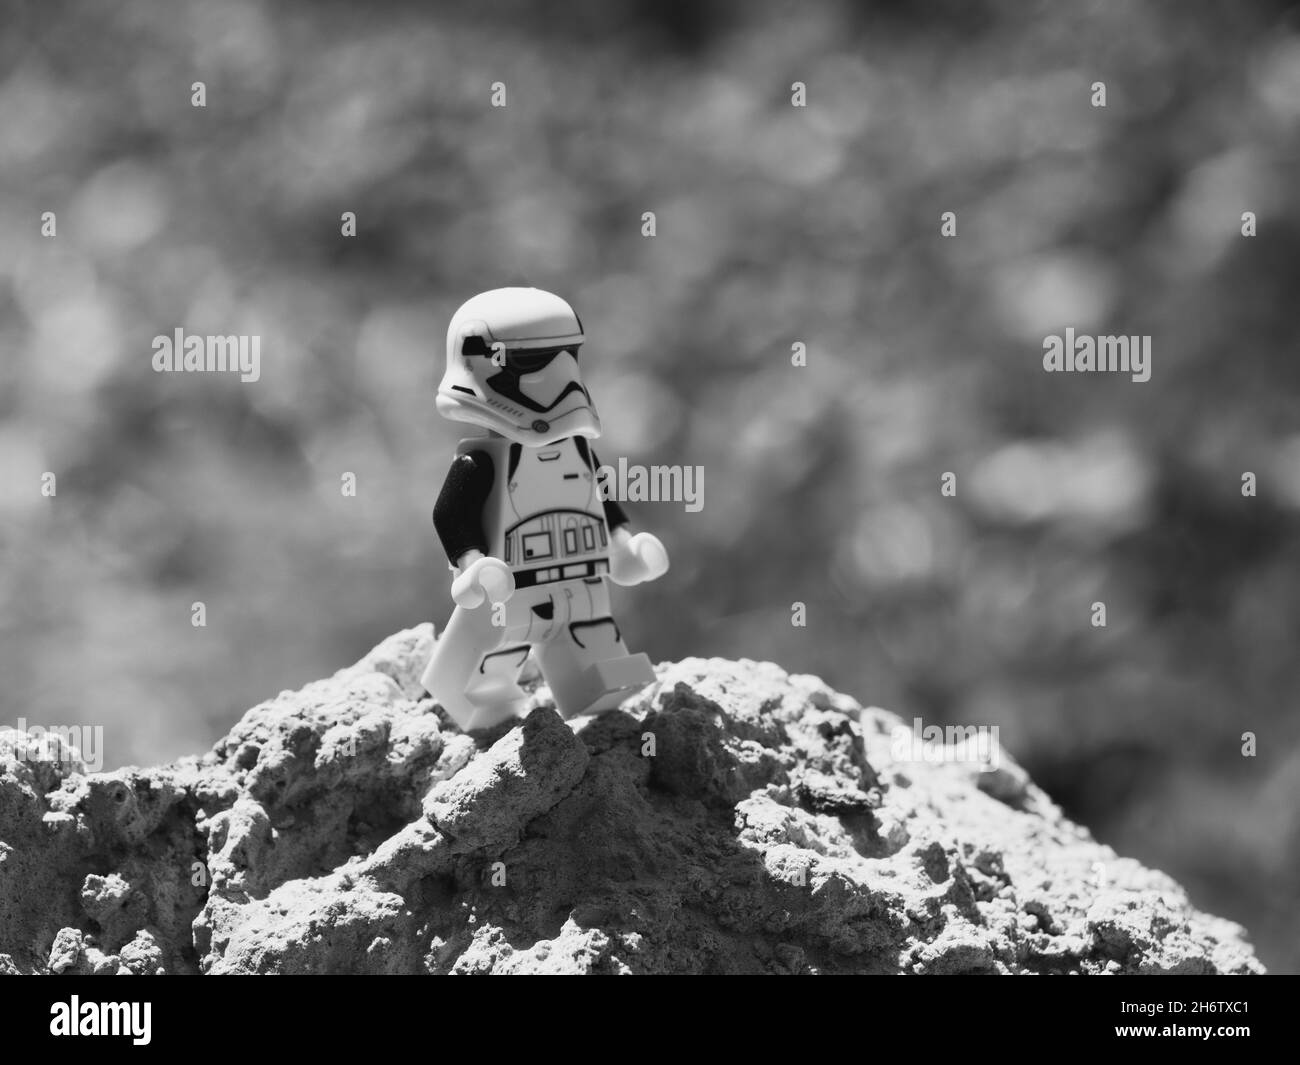 Chernihiv, Ukraine, July 13, 2021. A plastic minifigure of a Star Wars character. Imperial stormtrooper close-up. Illustrative editorial. Stock Photo